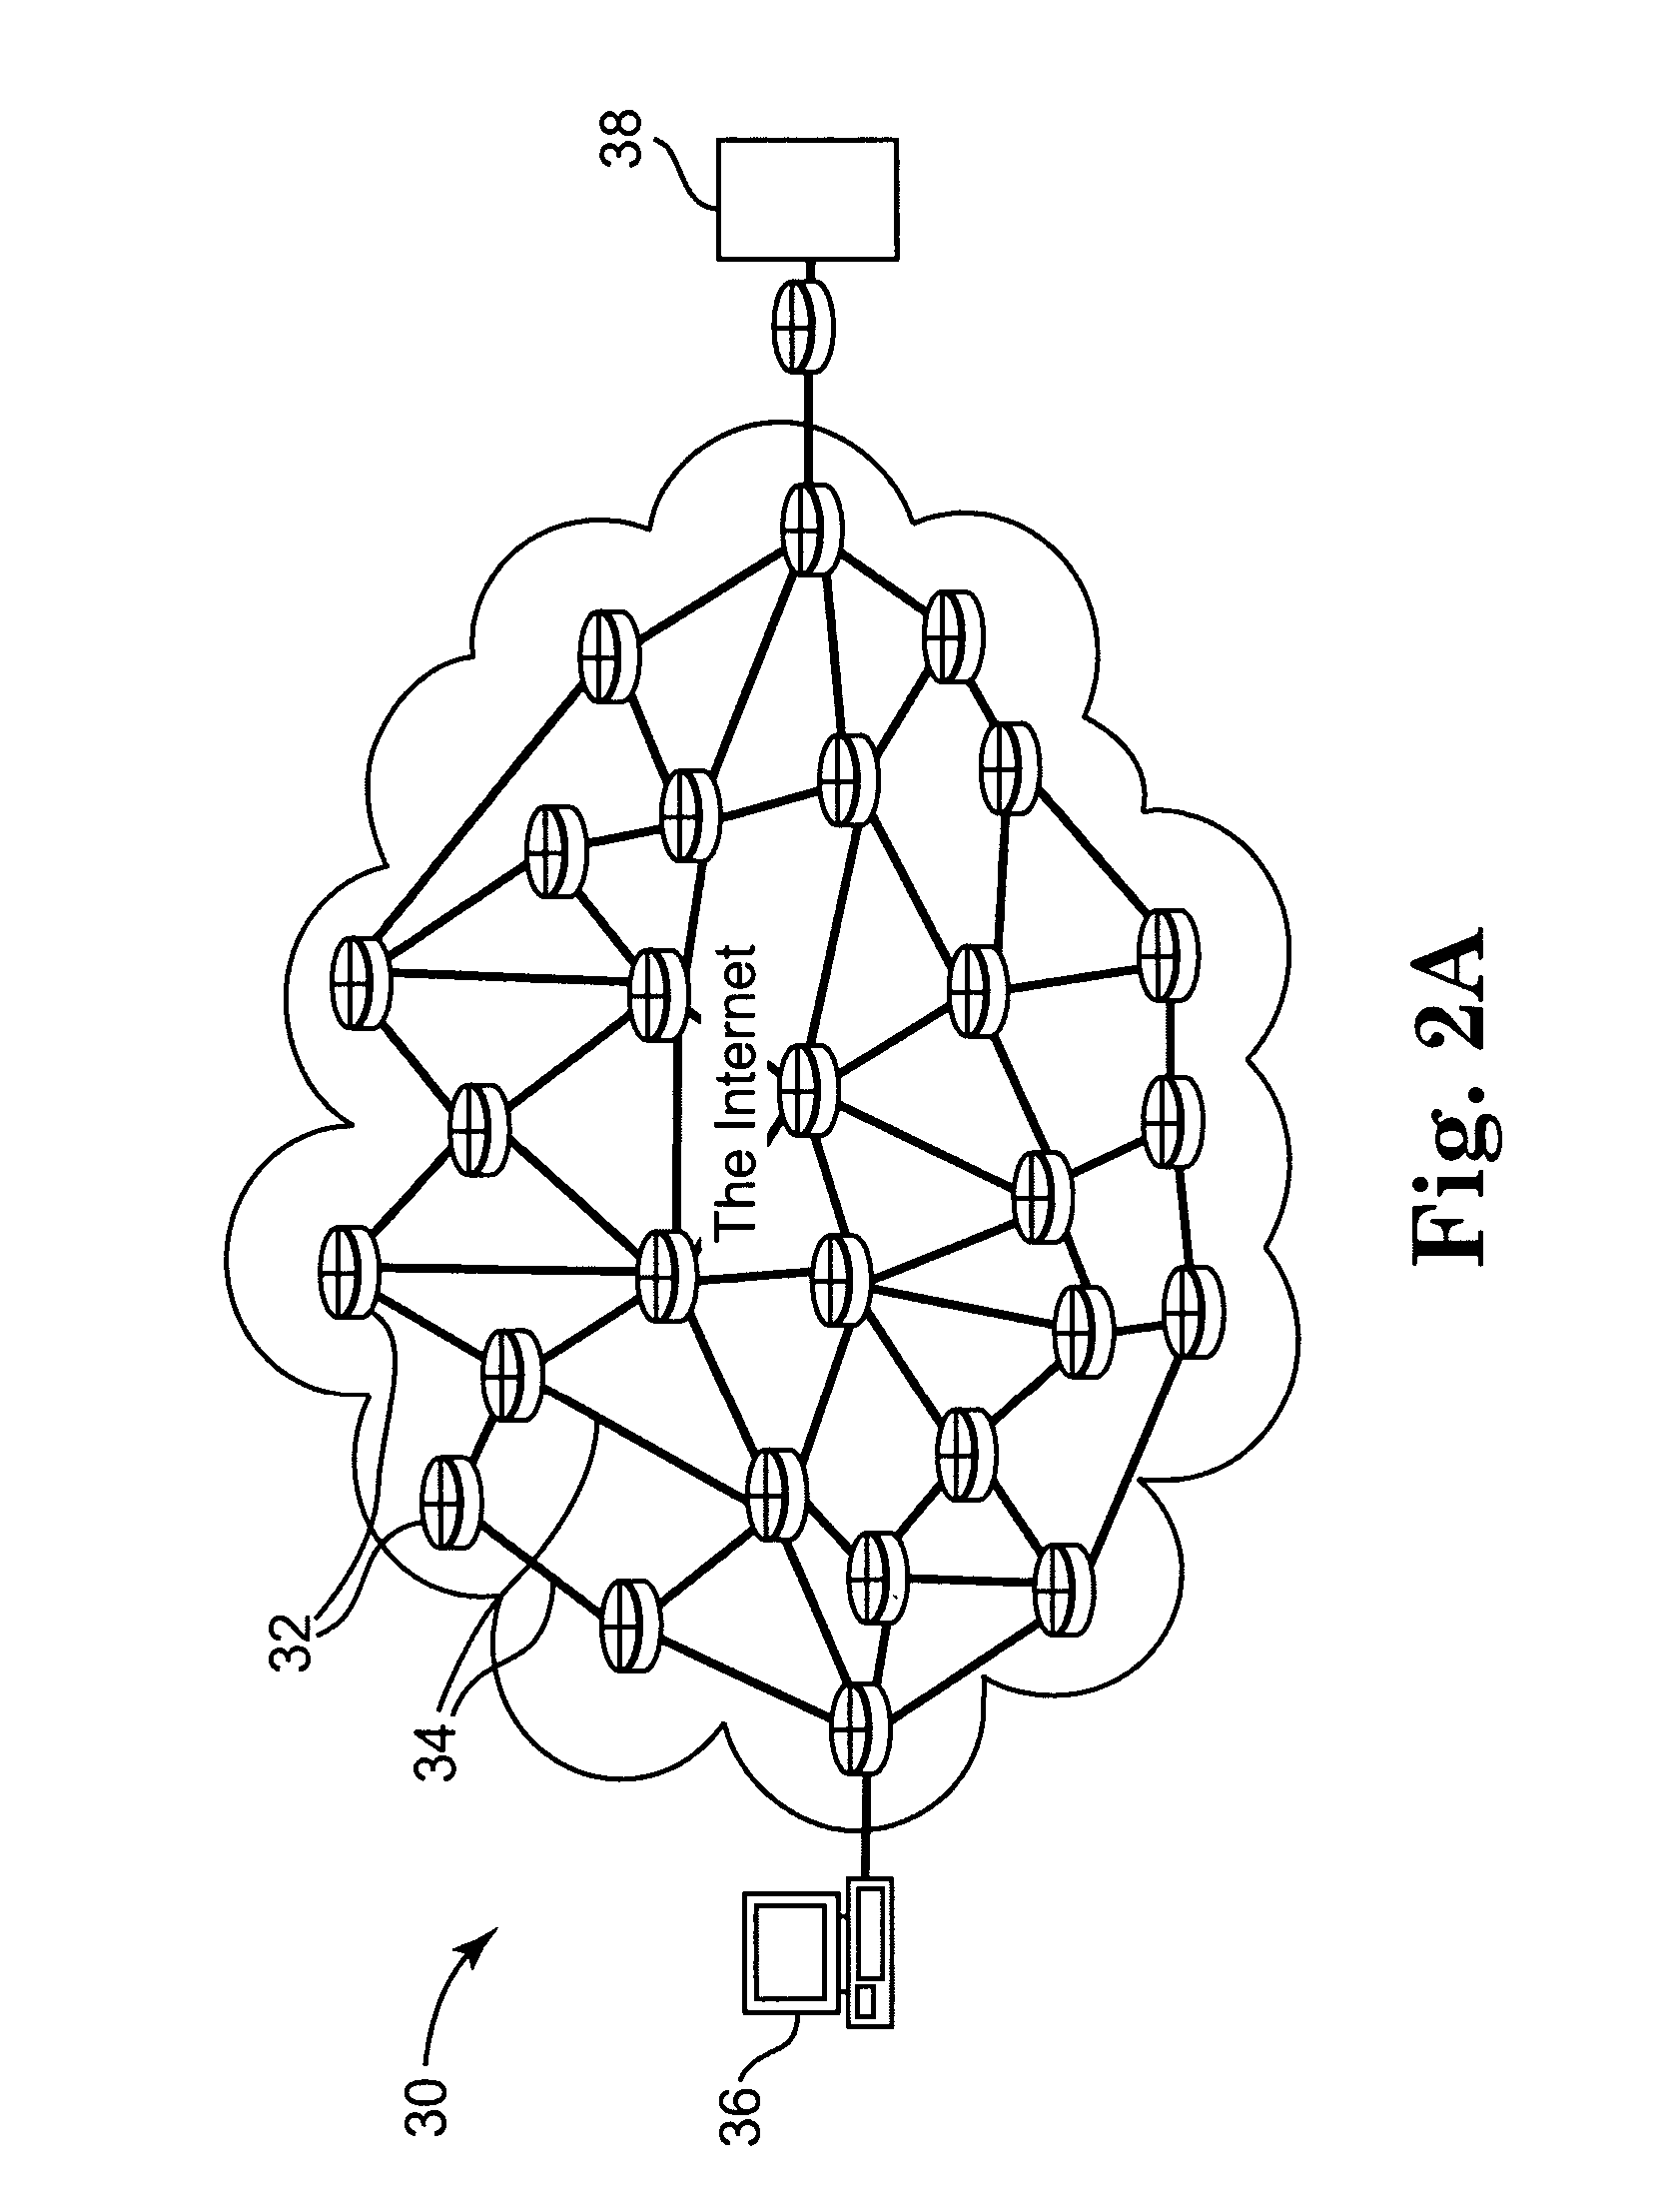 Network usage analysis system using cost structure and revenue and method